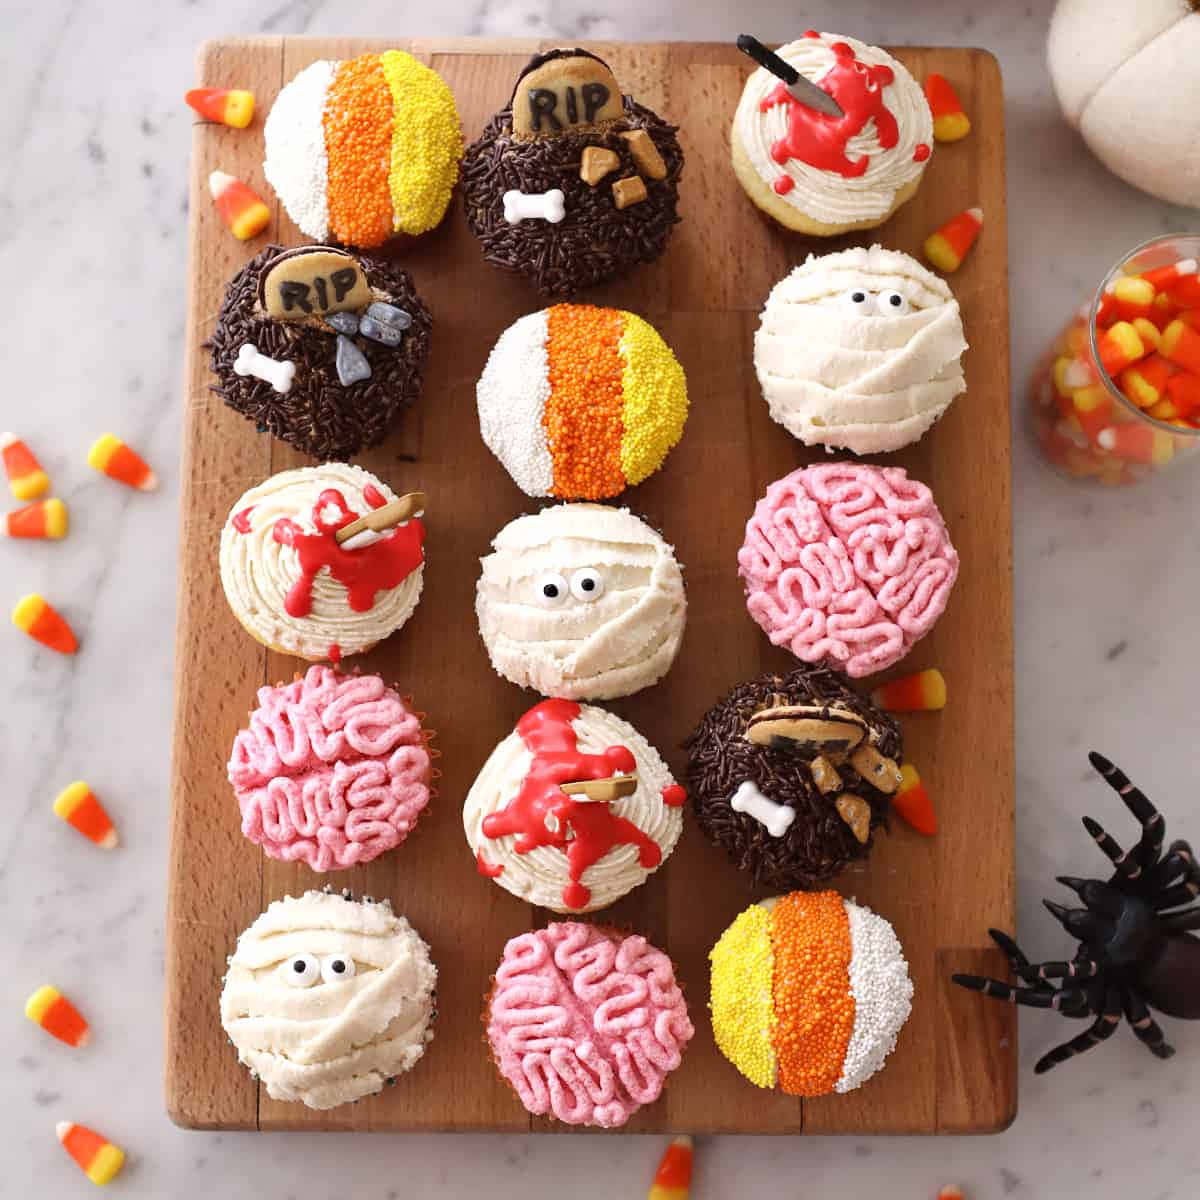 Spooky Halloween Themed Cupcakes - The Perfect Treat For Your Halloween Party Wallpaper